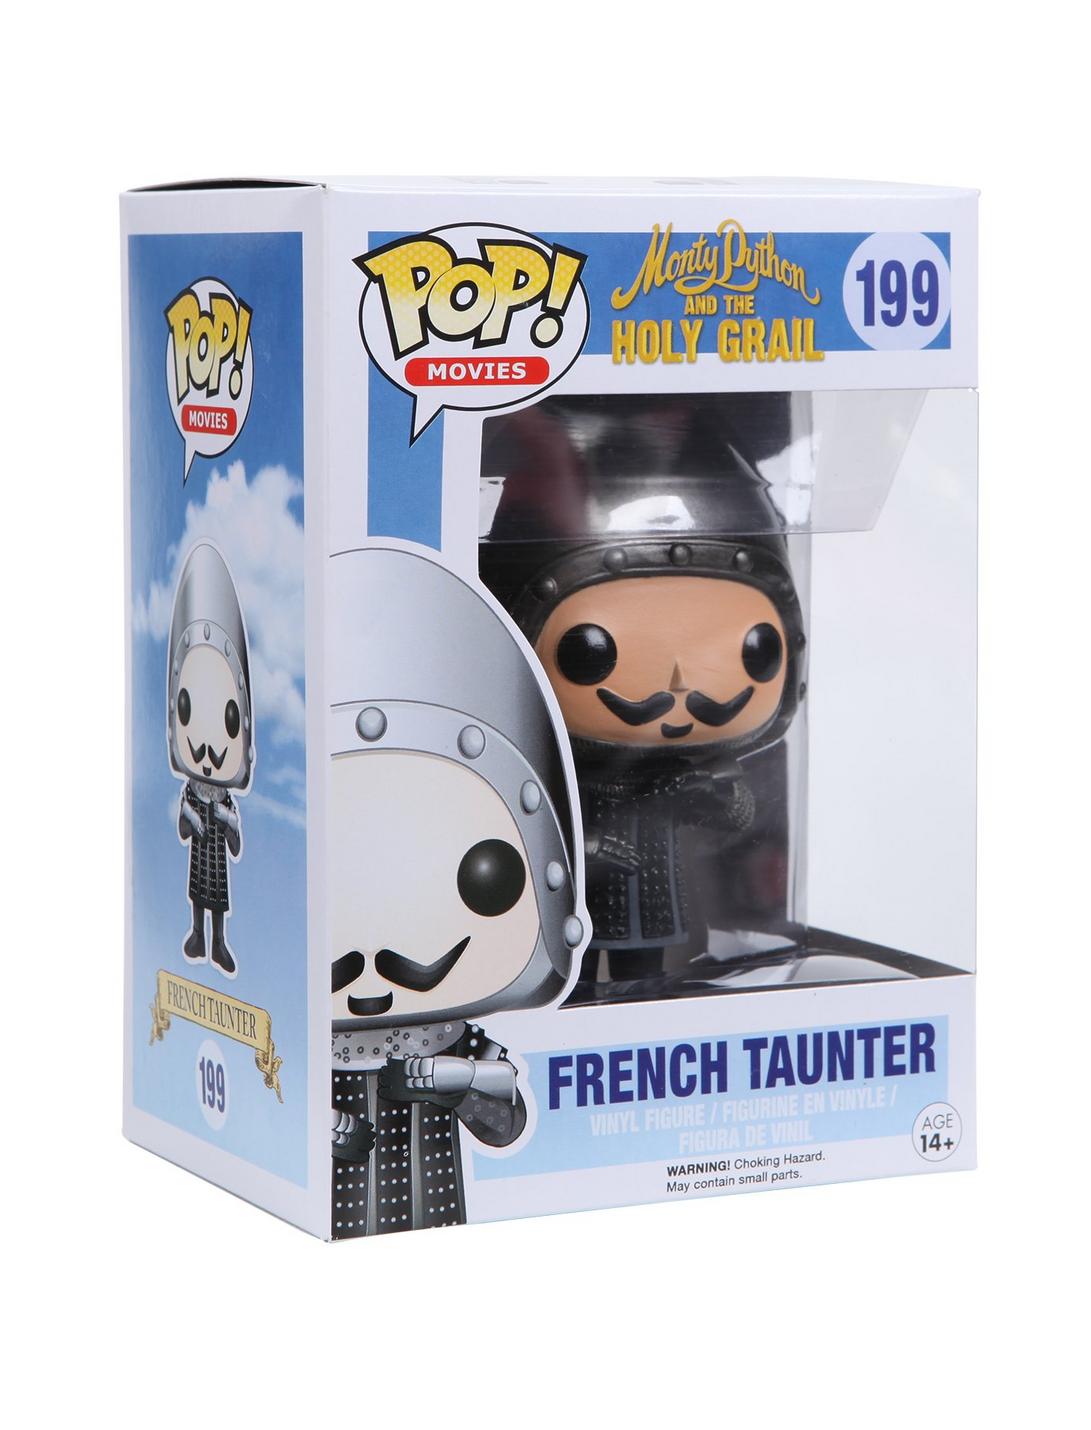 Funko Pop Movies Monty Python and The Holy Grail French Taunter Vinyl Figure 199 for sale online